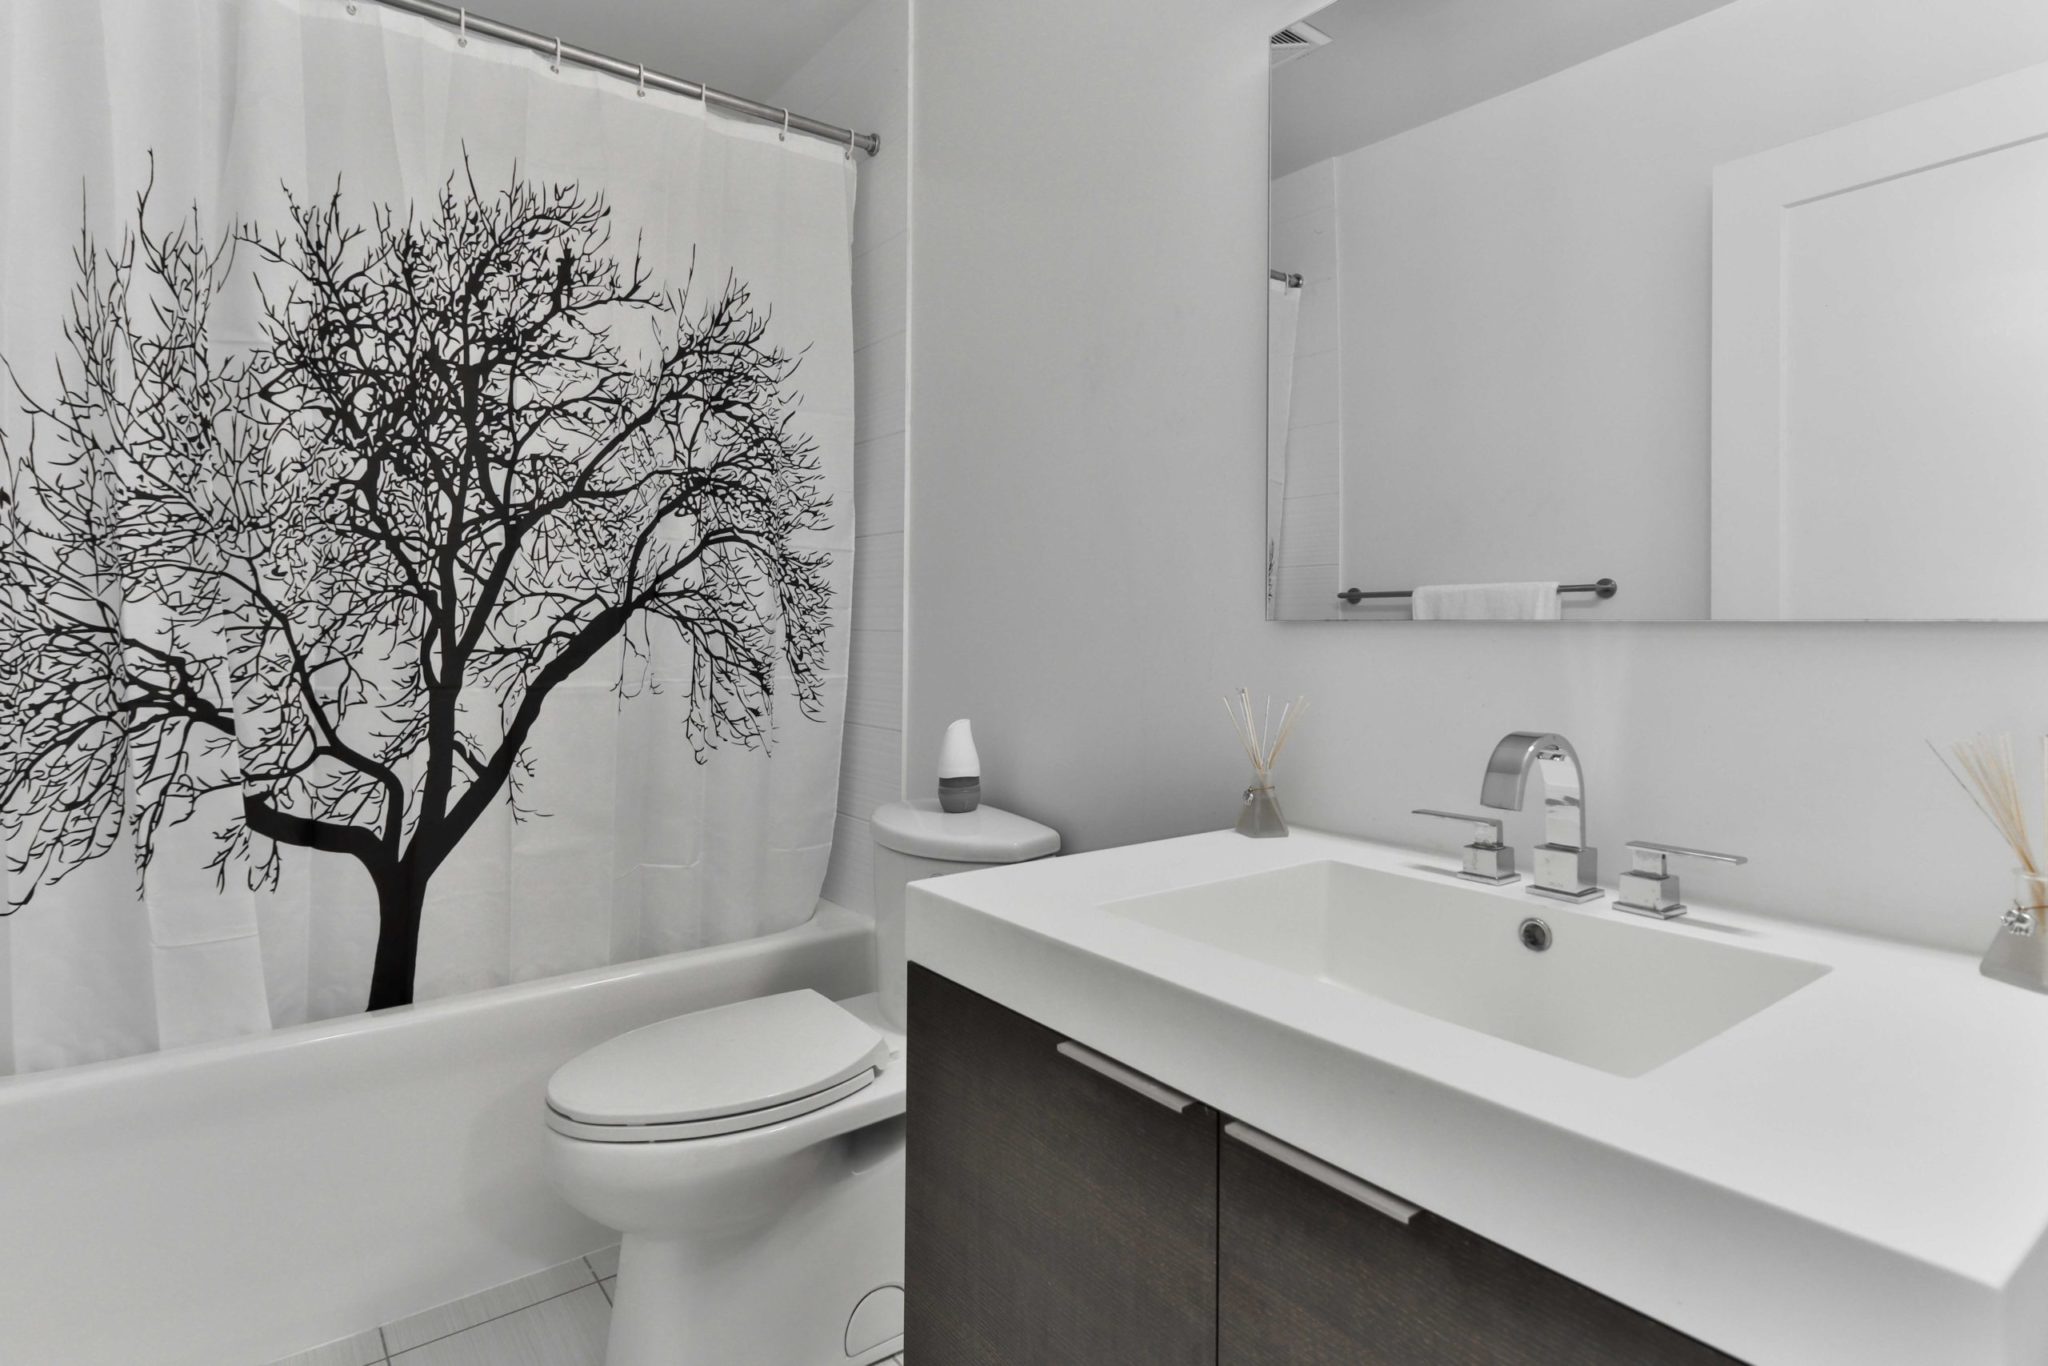 13 bathroom gray walls shower curtain with tree quartz counter large vanity scaled 8